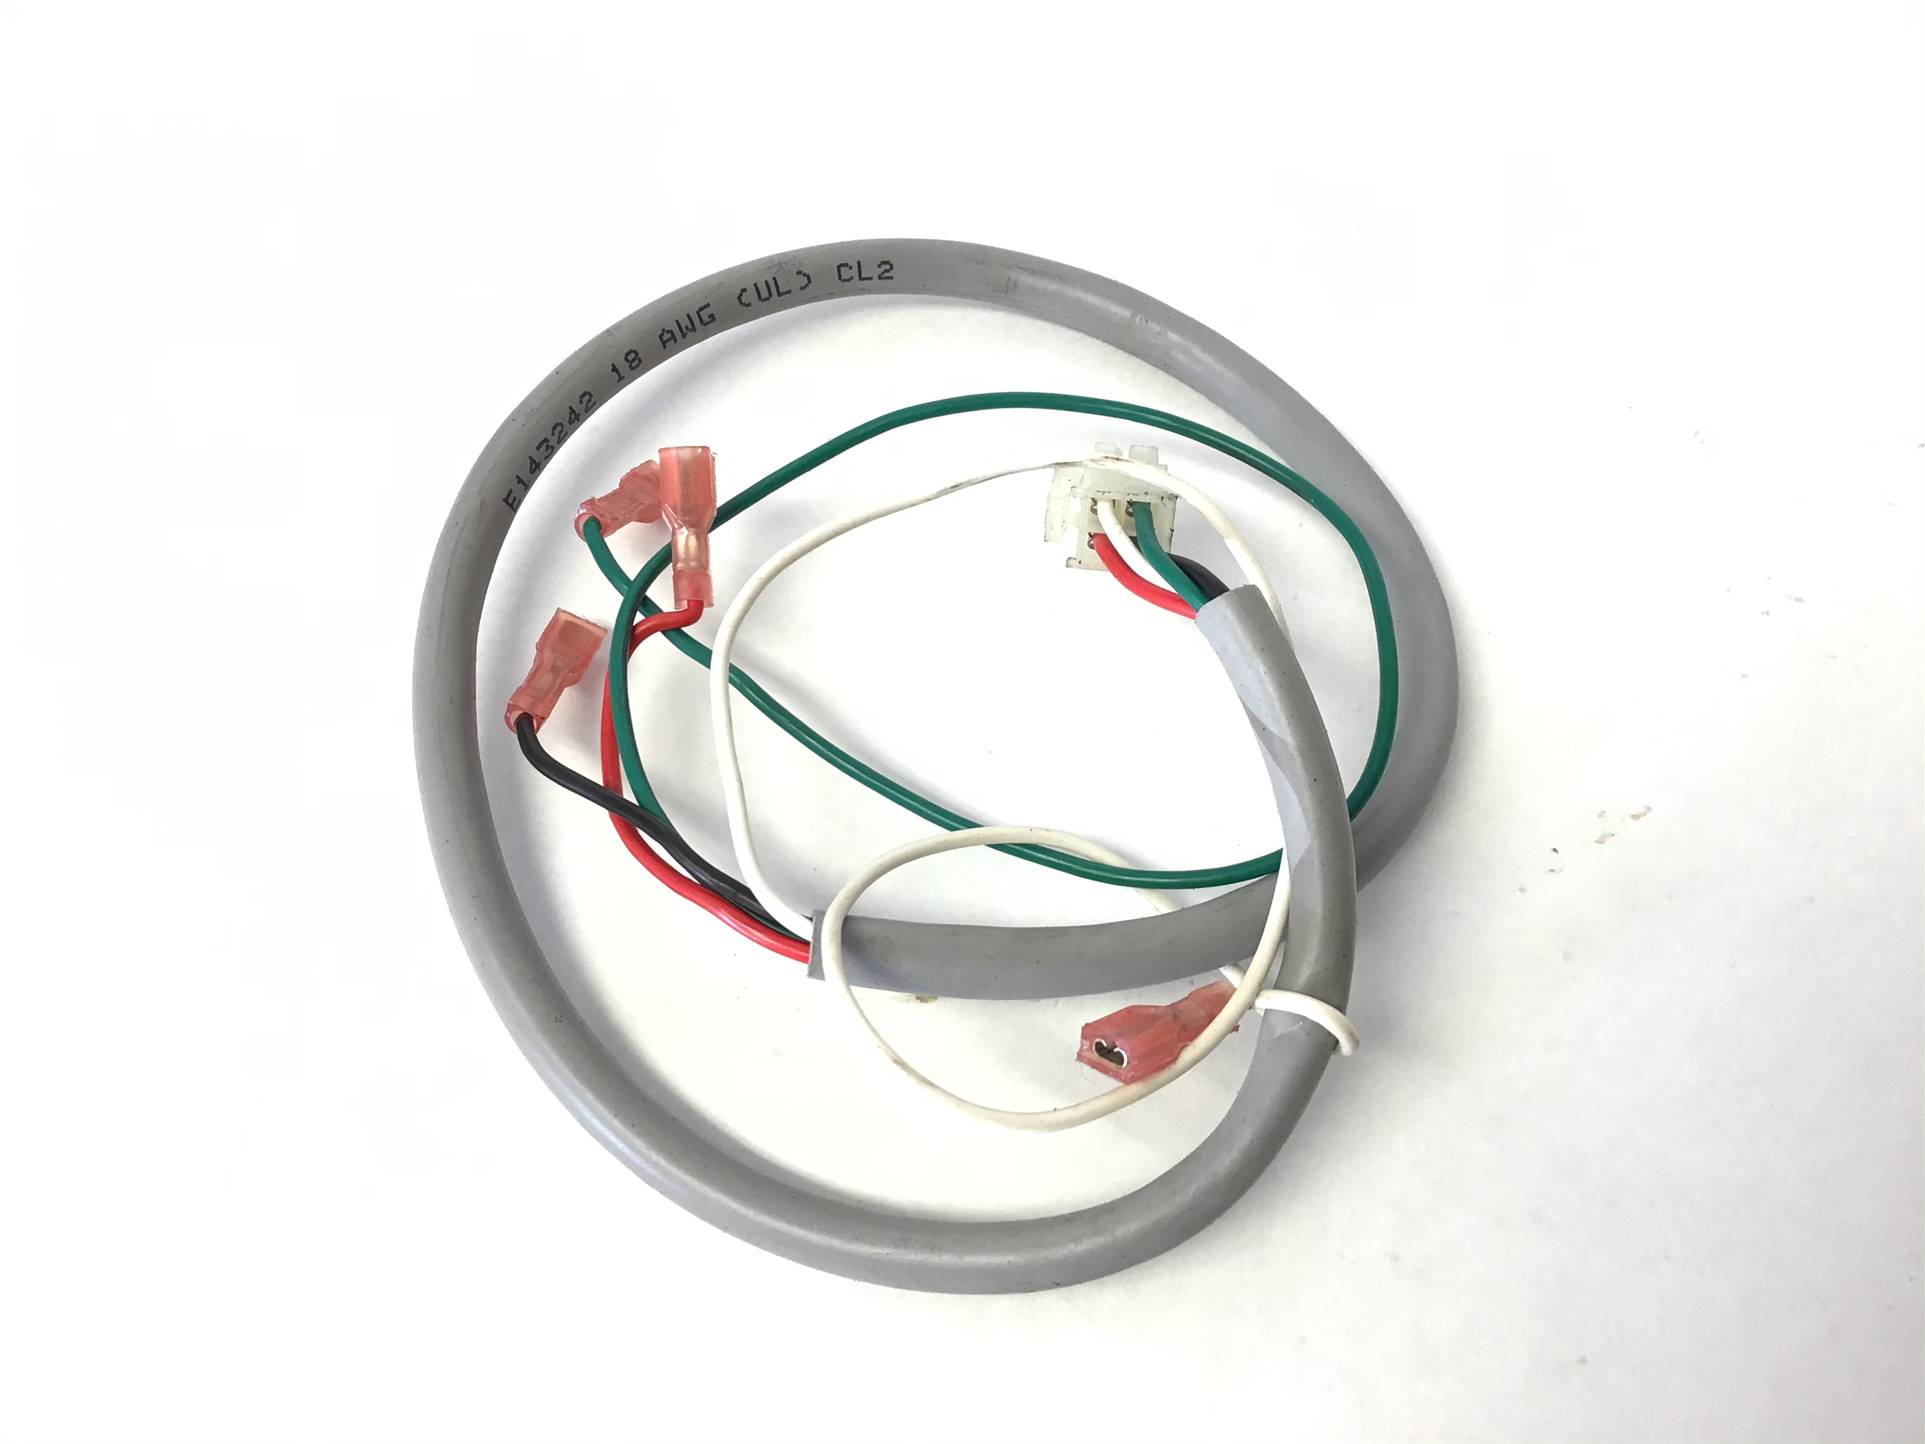 Pulse HR Wire Harness Cable (Used)